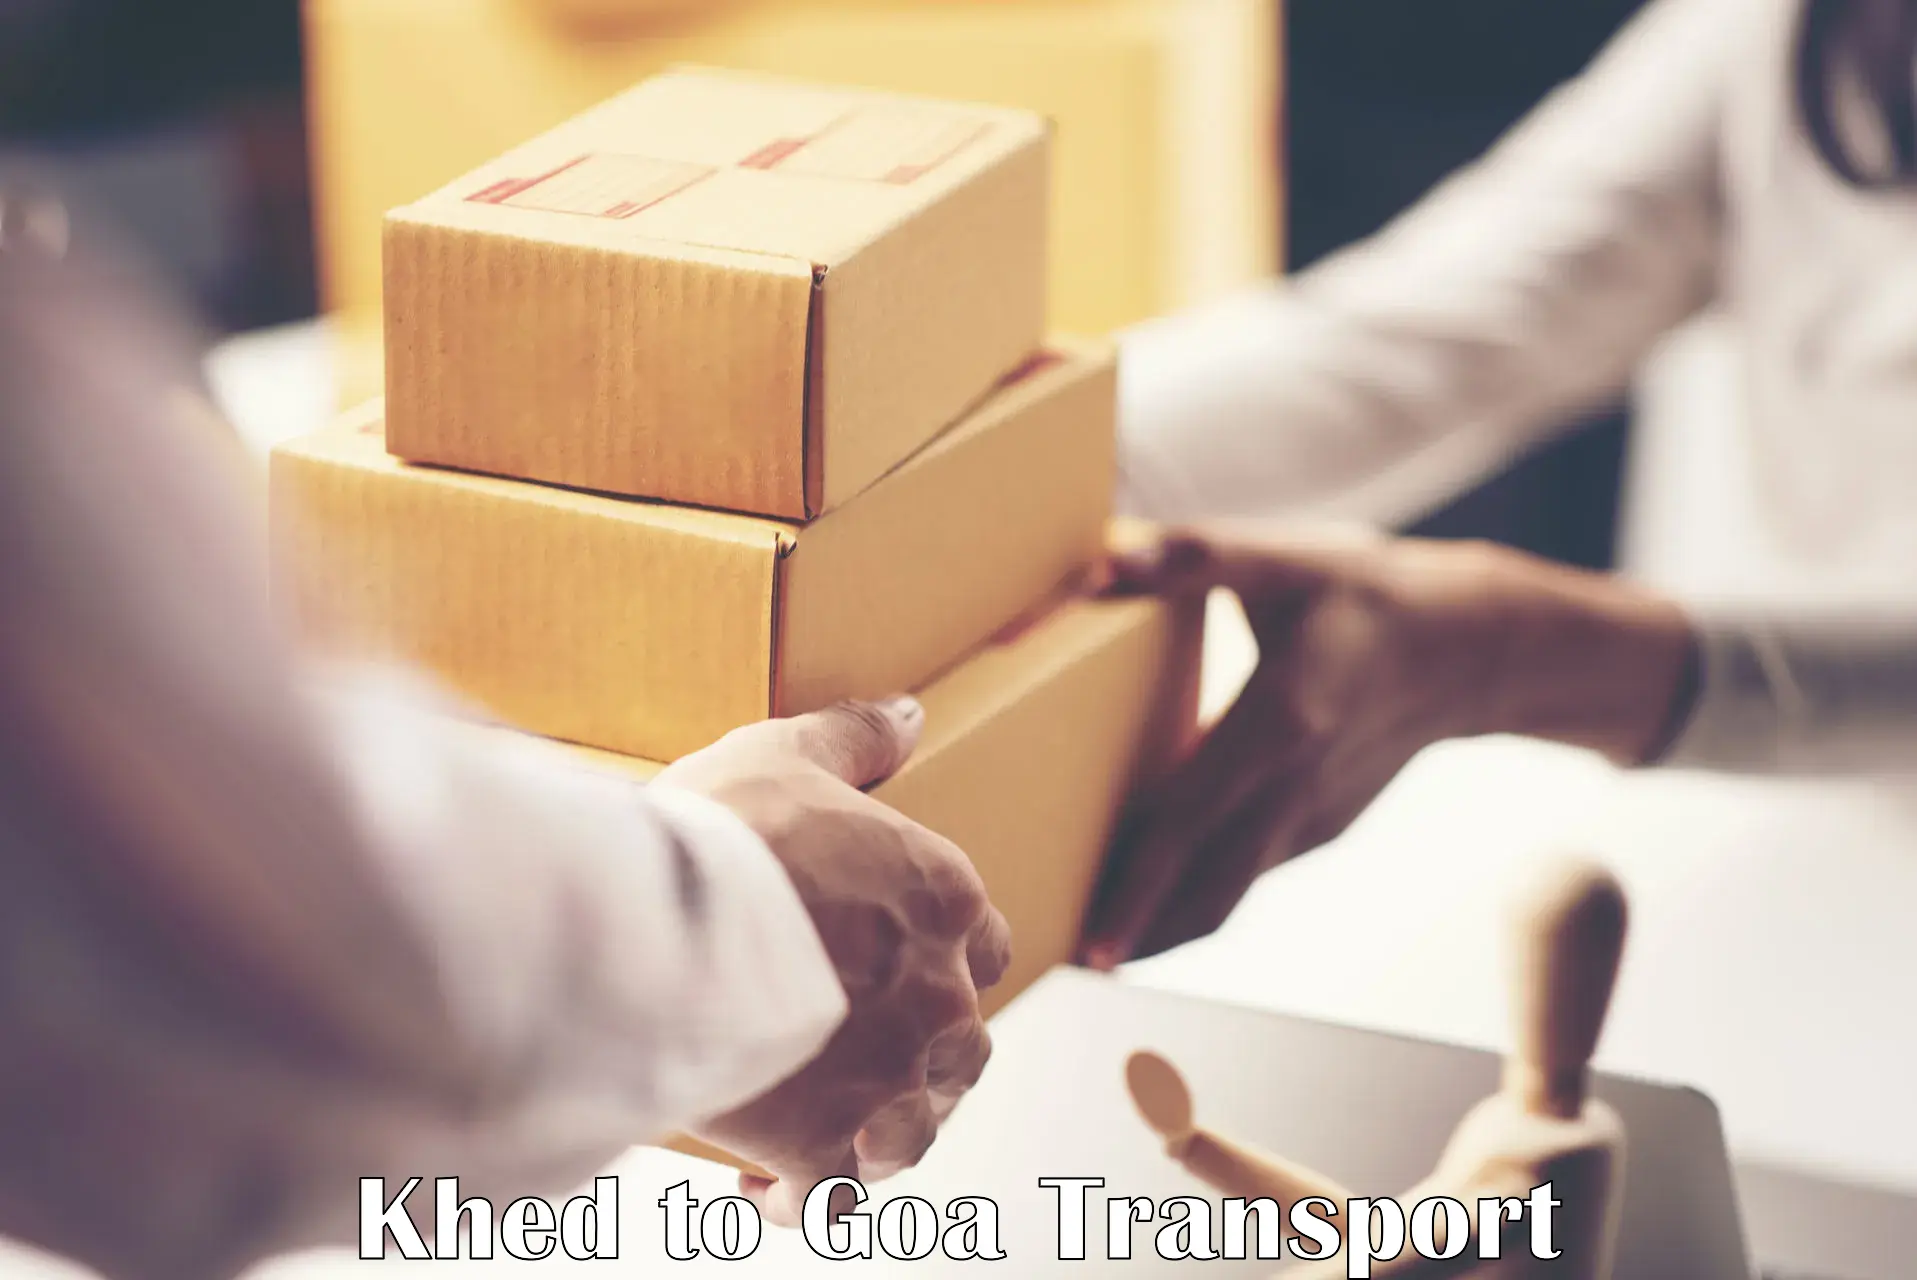 Transport in sharing in Khed to Bicholim